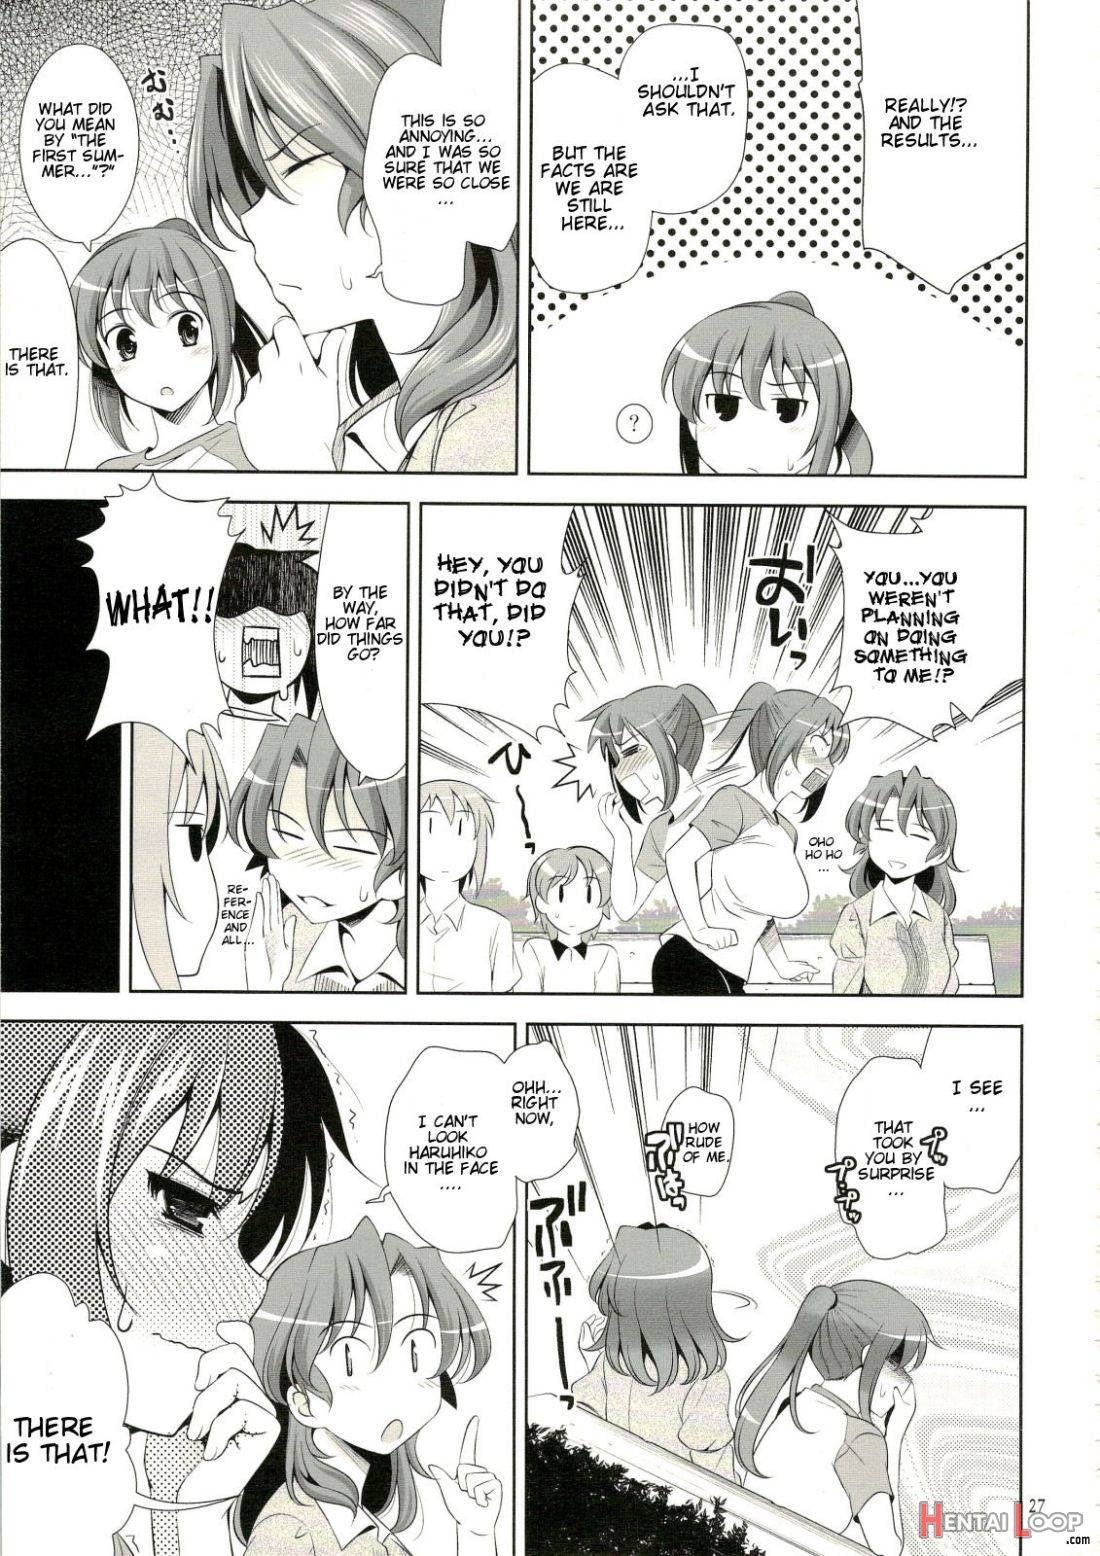 Manatsu no Yo no Yume no Mata Yume no Mata Yume page 24